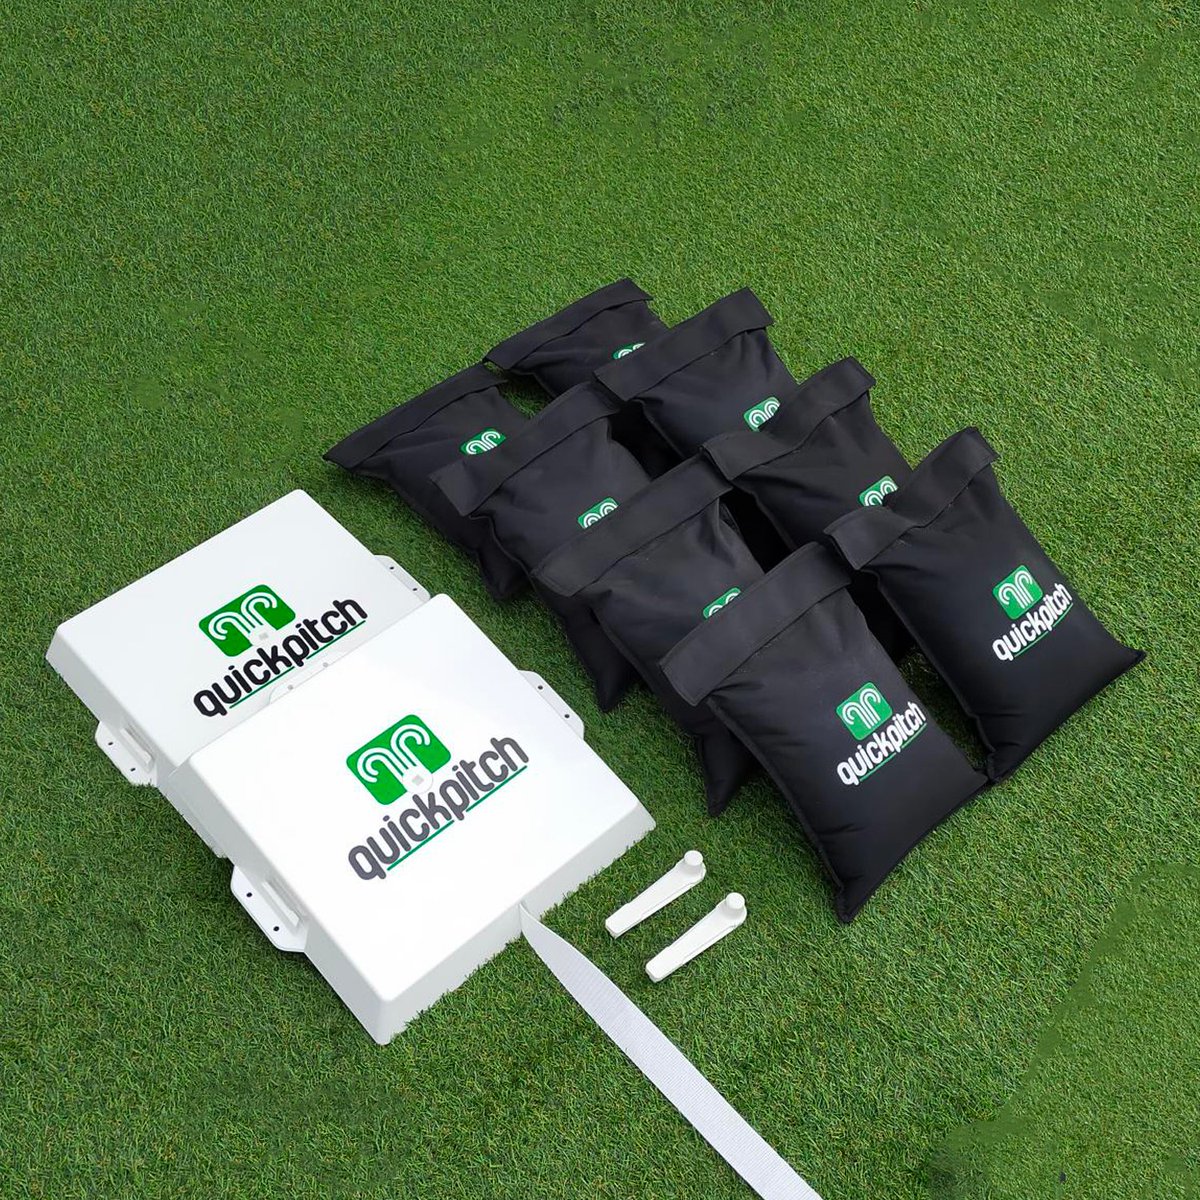 📢 Quick Pitch Can be used on ANY Surface! Take Your Line Marking Kit to ANY 3G/4G Surface and Make Your Own Pitch ⚽️🏉

#quickpitchonline #footballtraining #trainingequipment #sportsequipment #worldcup #football #rugbytraining